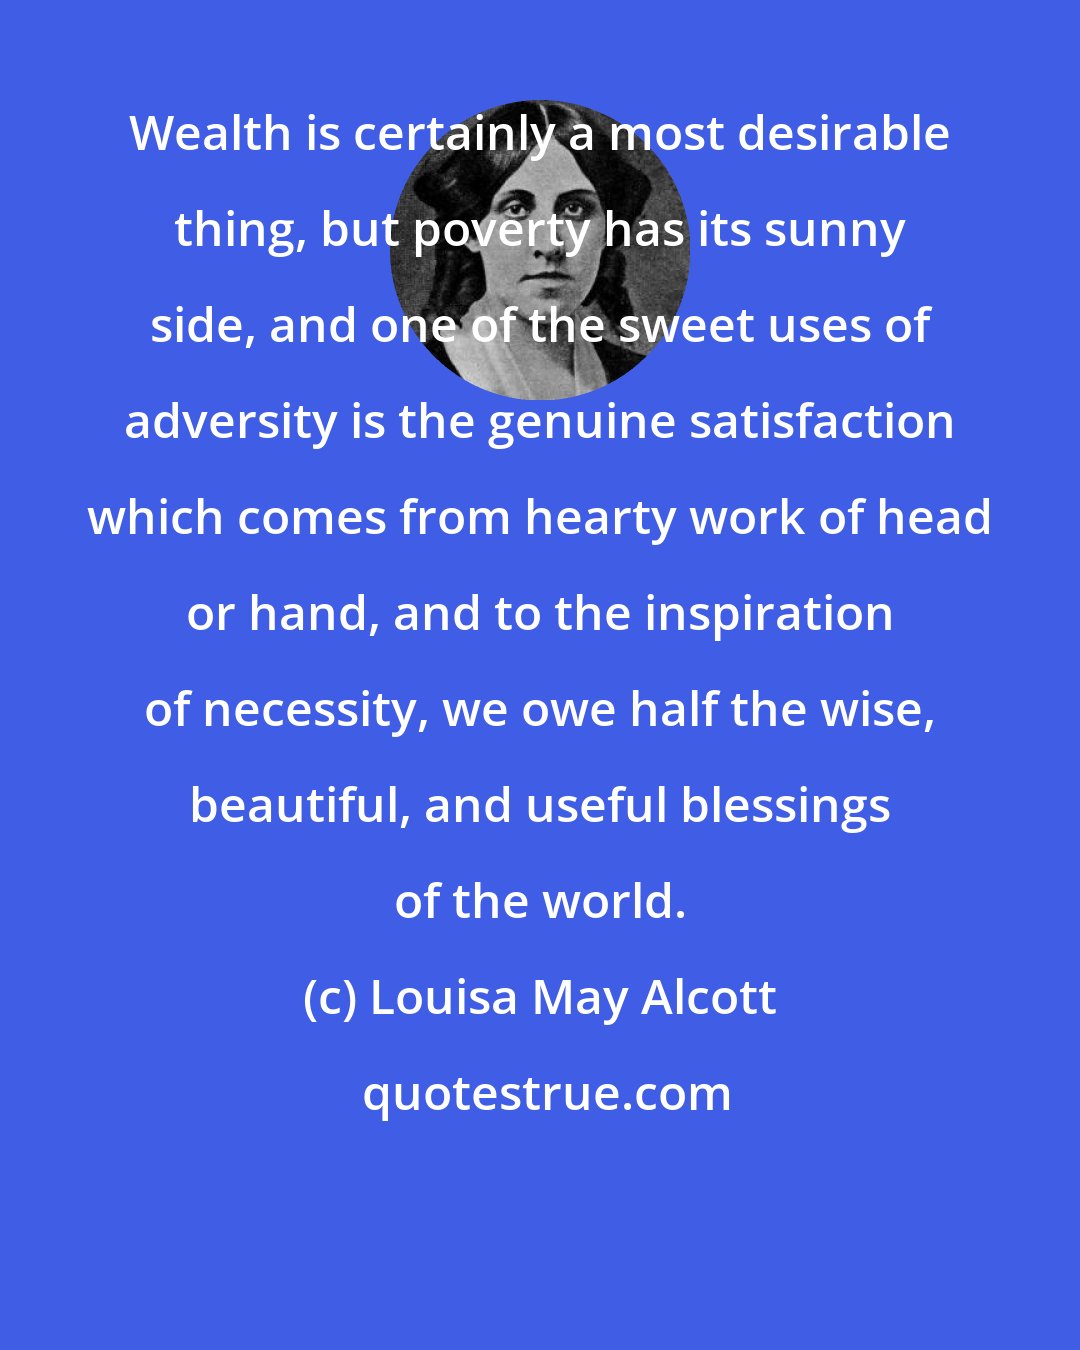 Louisa May Alcott: Wealth is certainly a most desirable thing, but poverty has its sunny side, and one of the sweet uses of adversity is the genuine satisfaction which comes from hearty work of head or hand, and to the inspiration of necessity, we owe half the wise, beautiful, and useful blessings of the world.